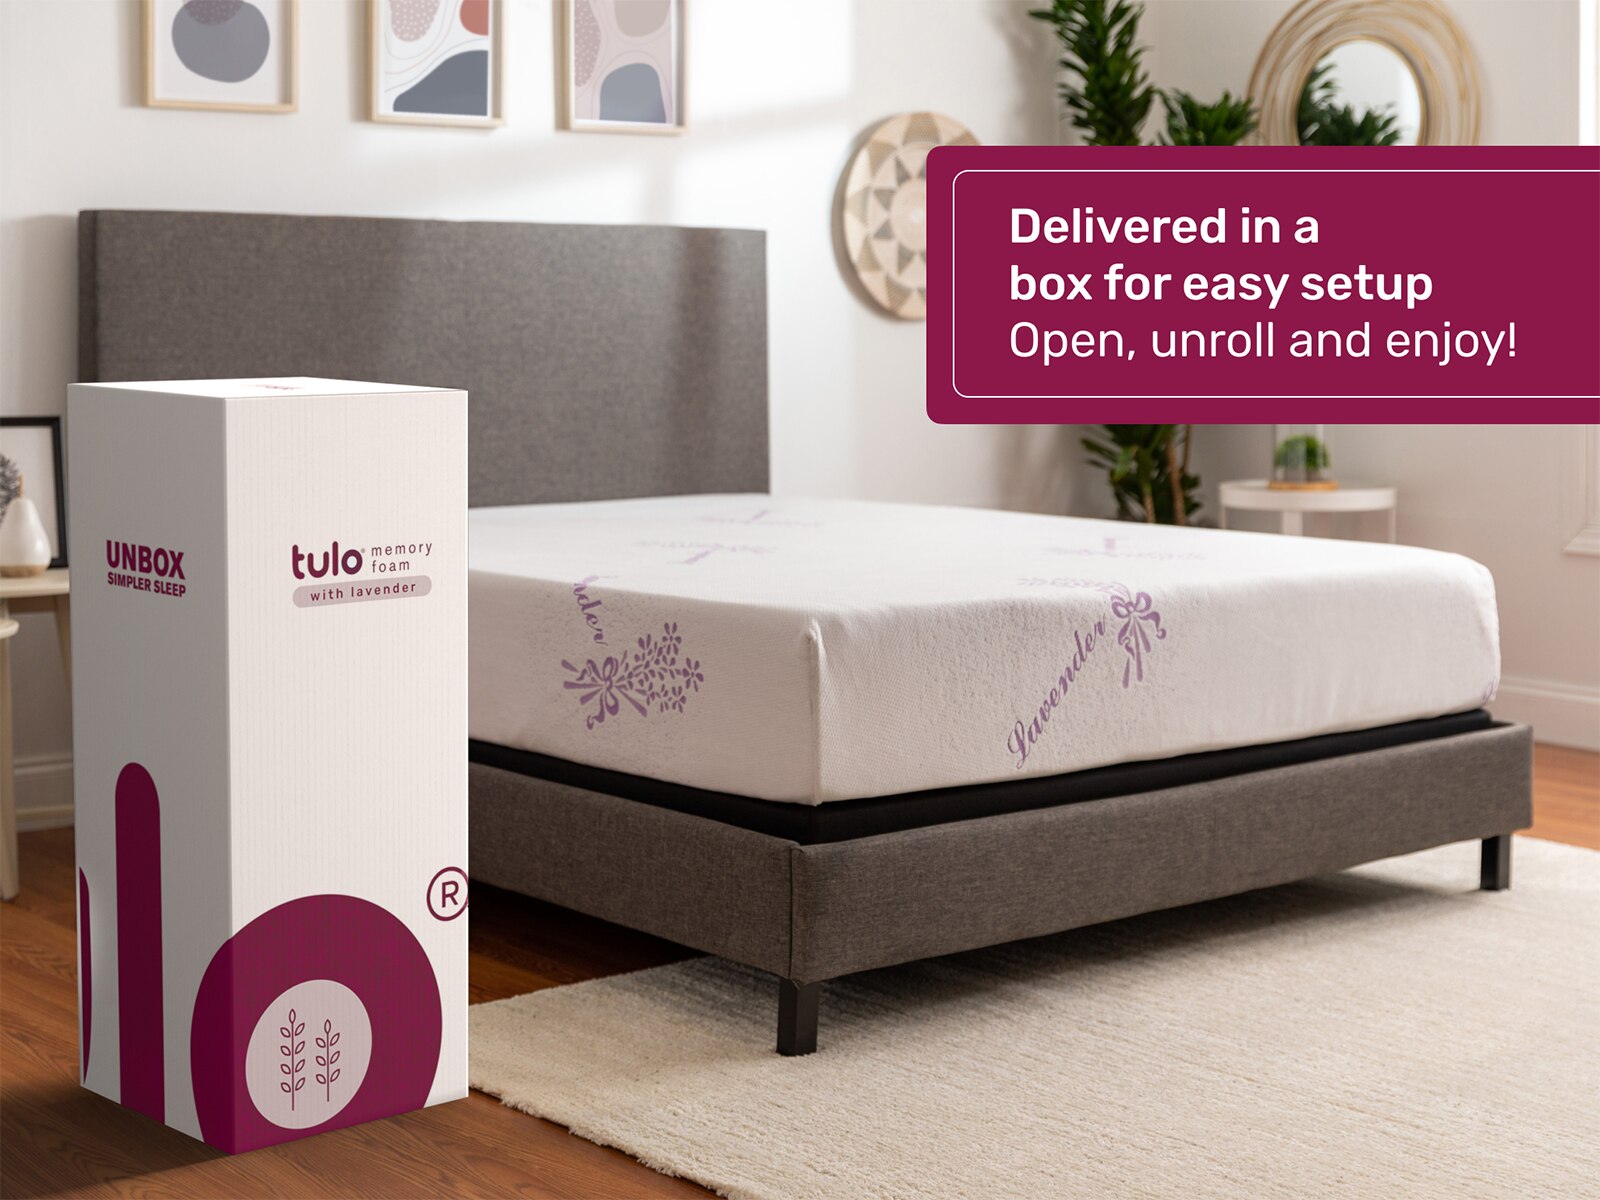 size of tulo queen size mattress box